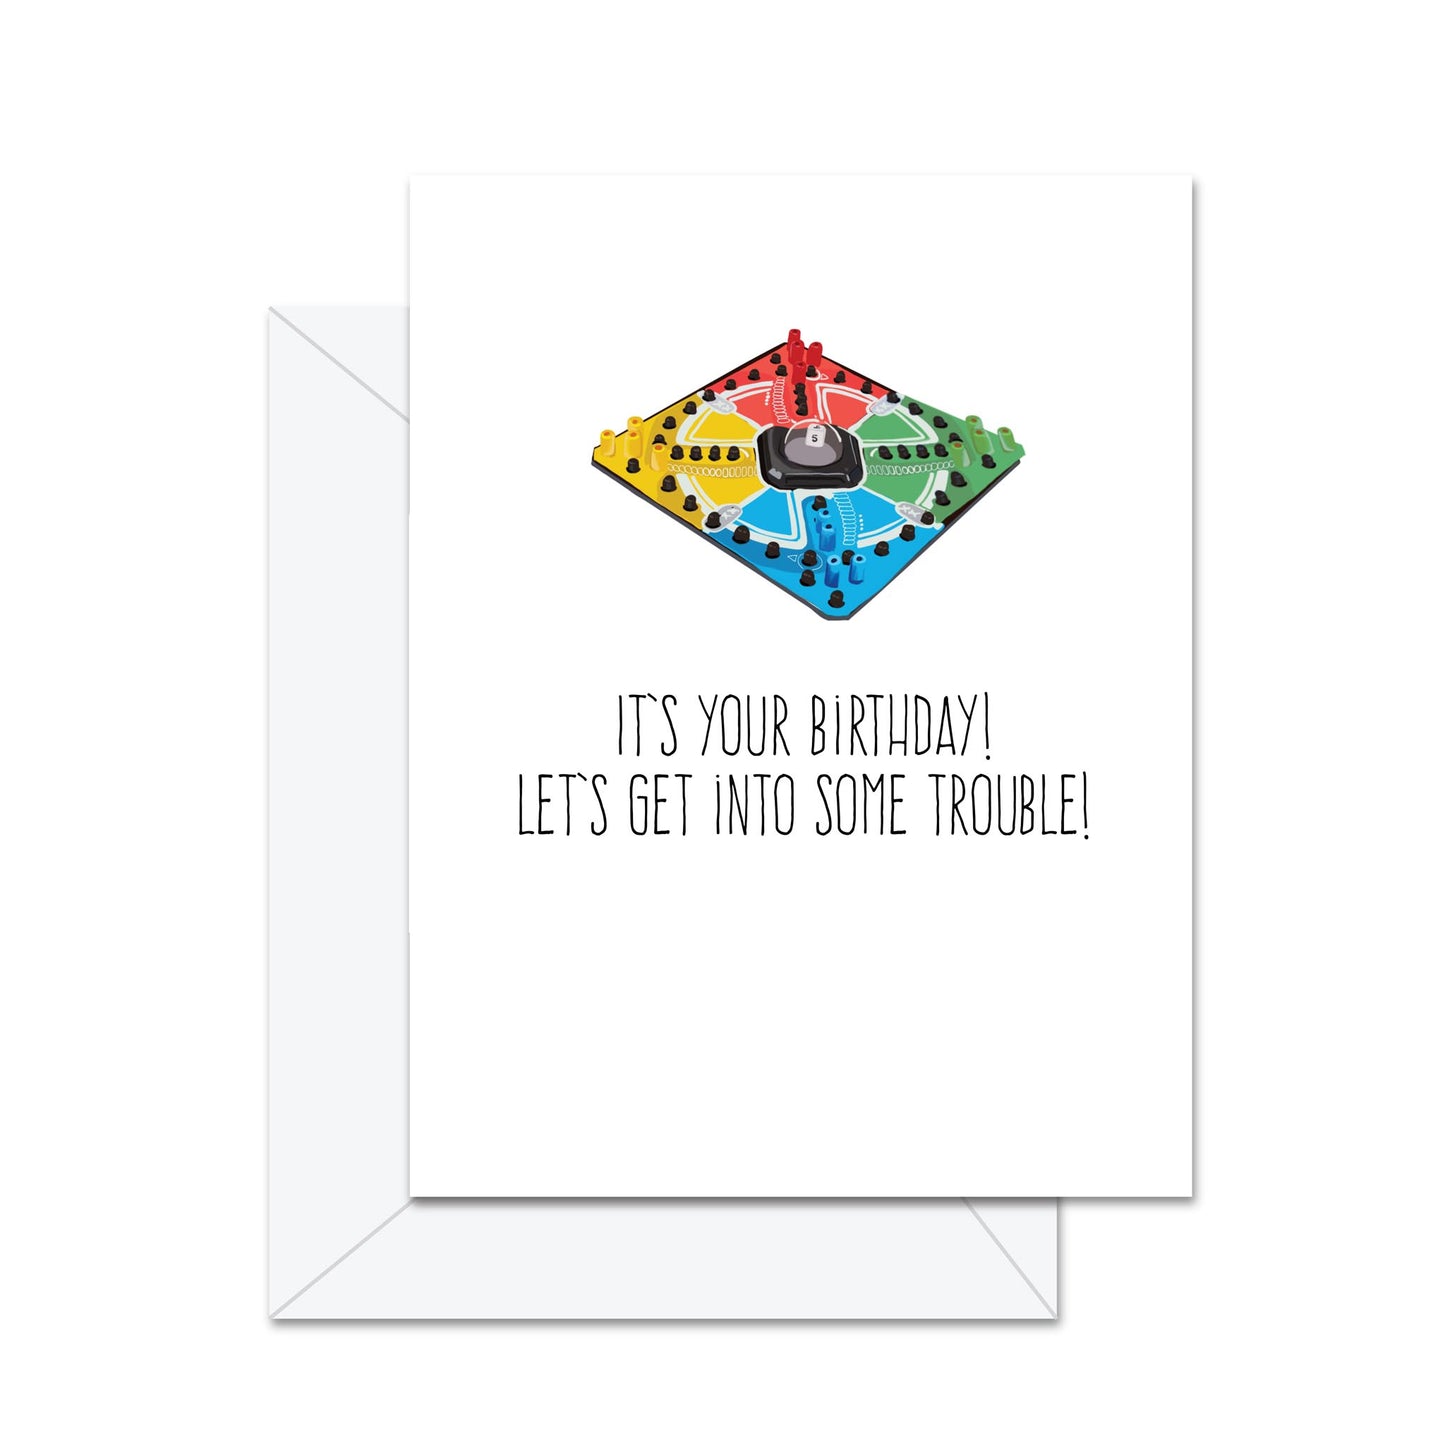 It's Your Birthday! Let's Get Into Some Trouble! - Greeting Card